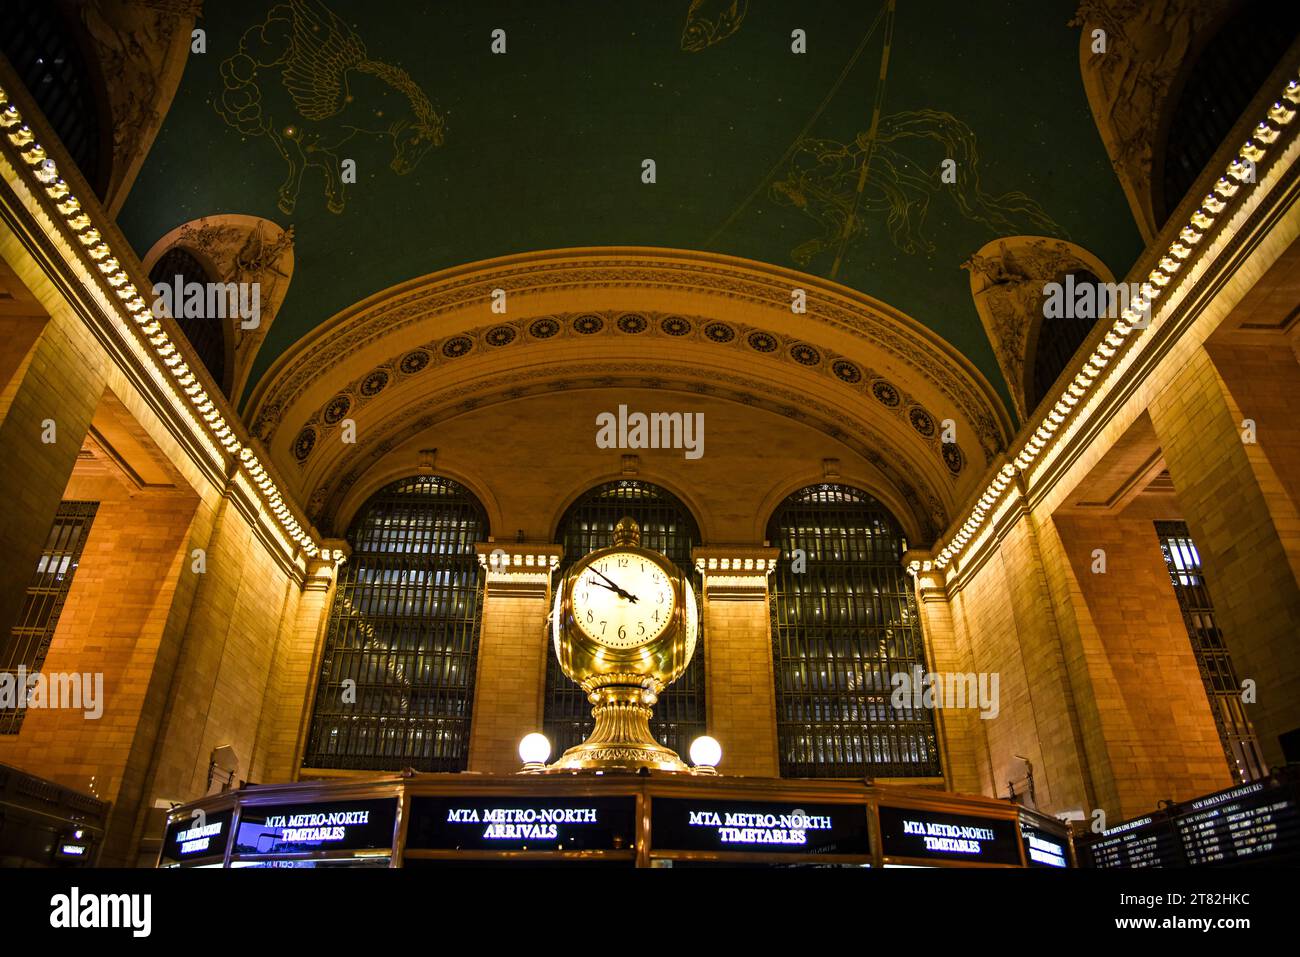 The Famous Clock atop the Information Booth in Grand Central Terminal Main Concourse - Manhattan, New York City Stock Photo